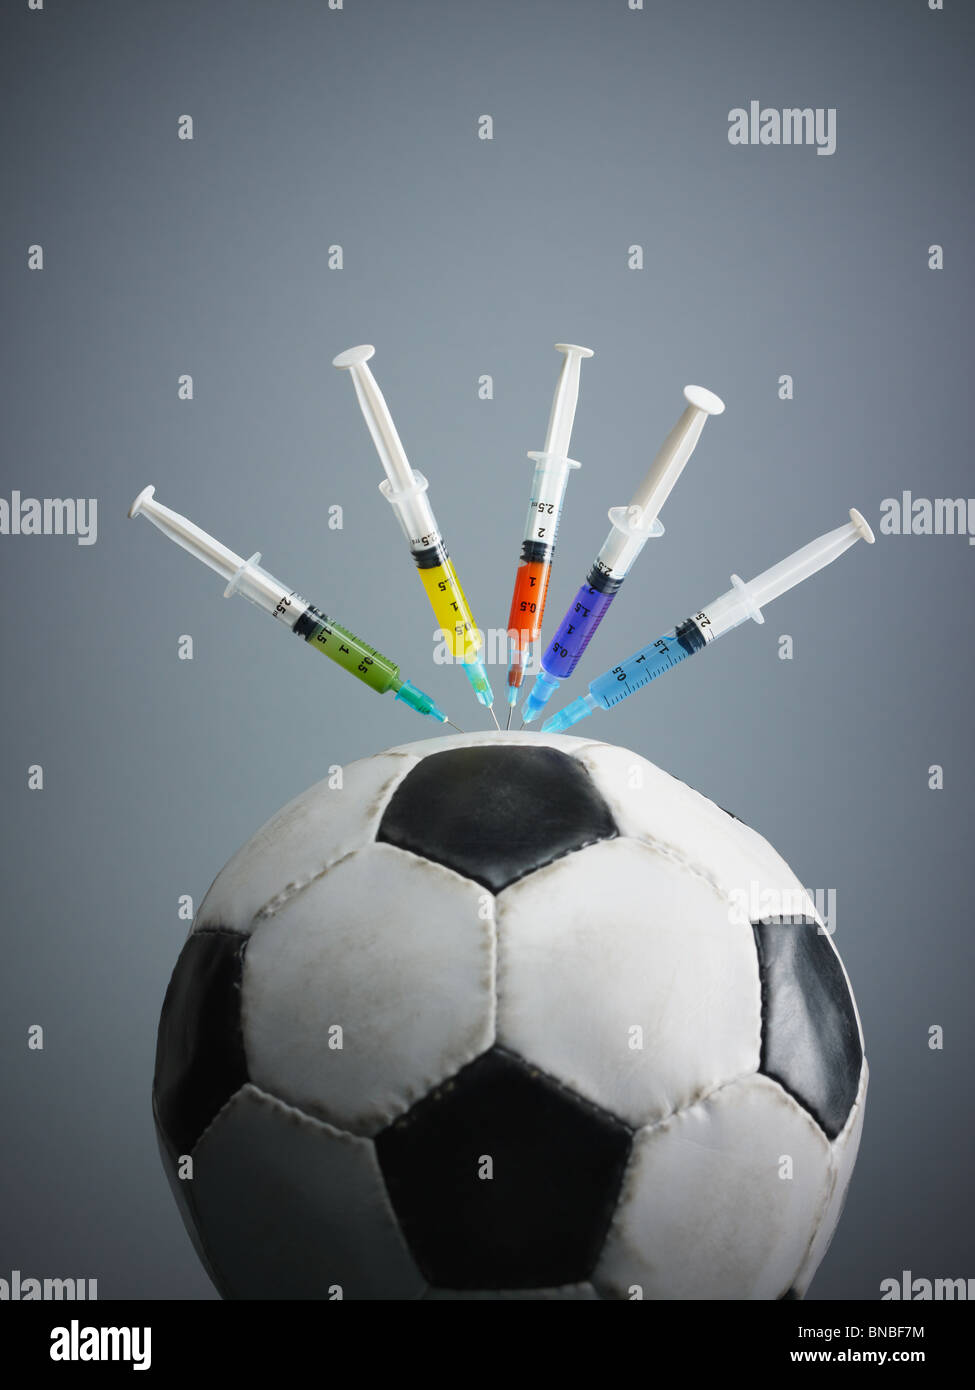 five syringes threaded in soccer ball. Copy space Stock Photo